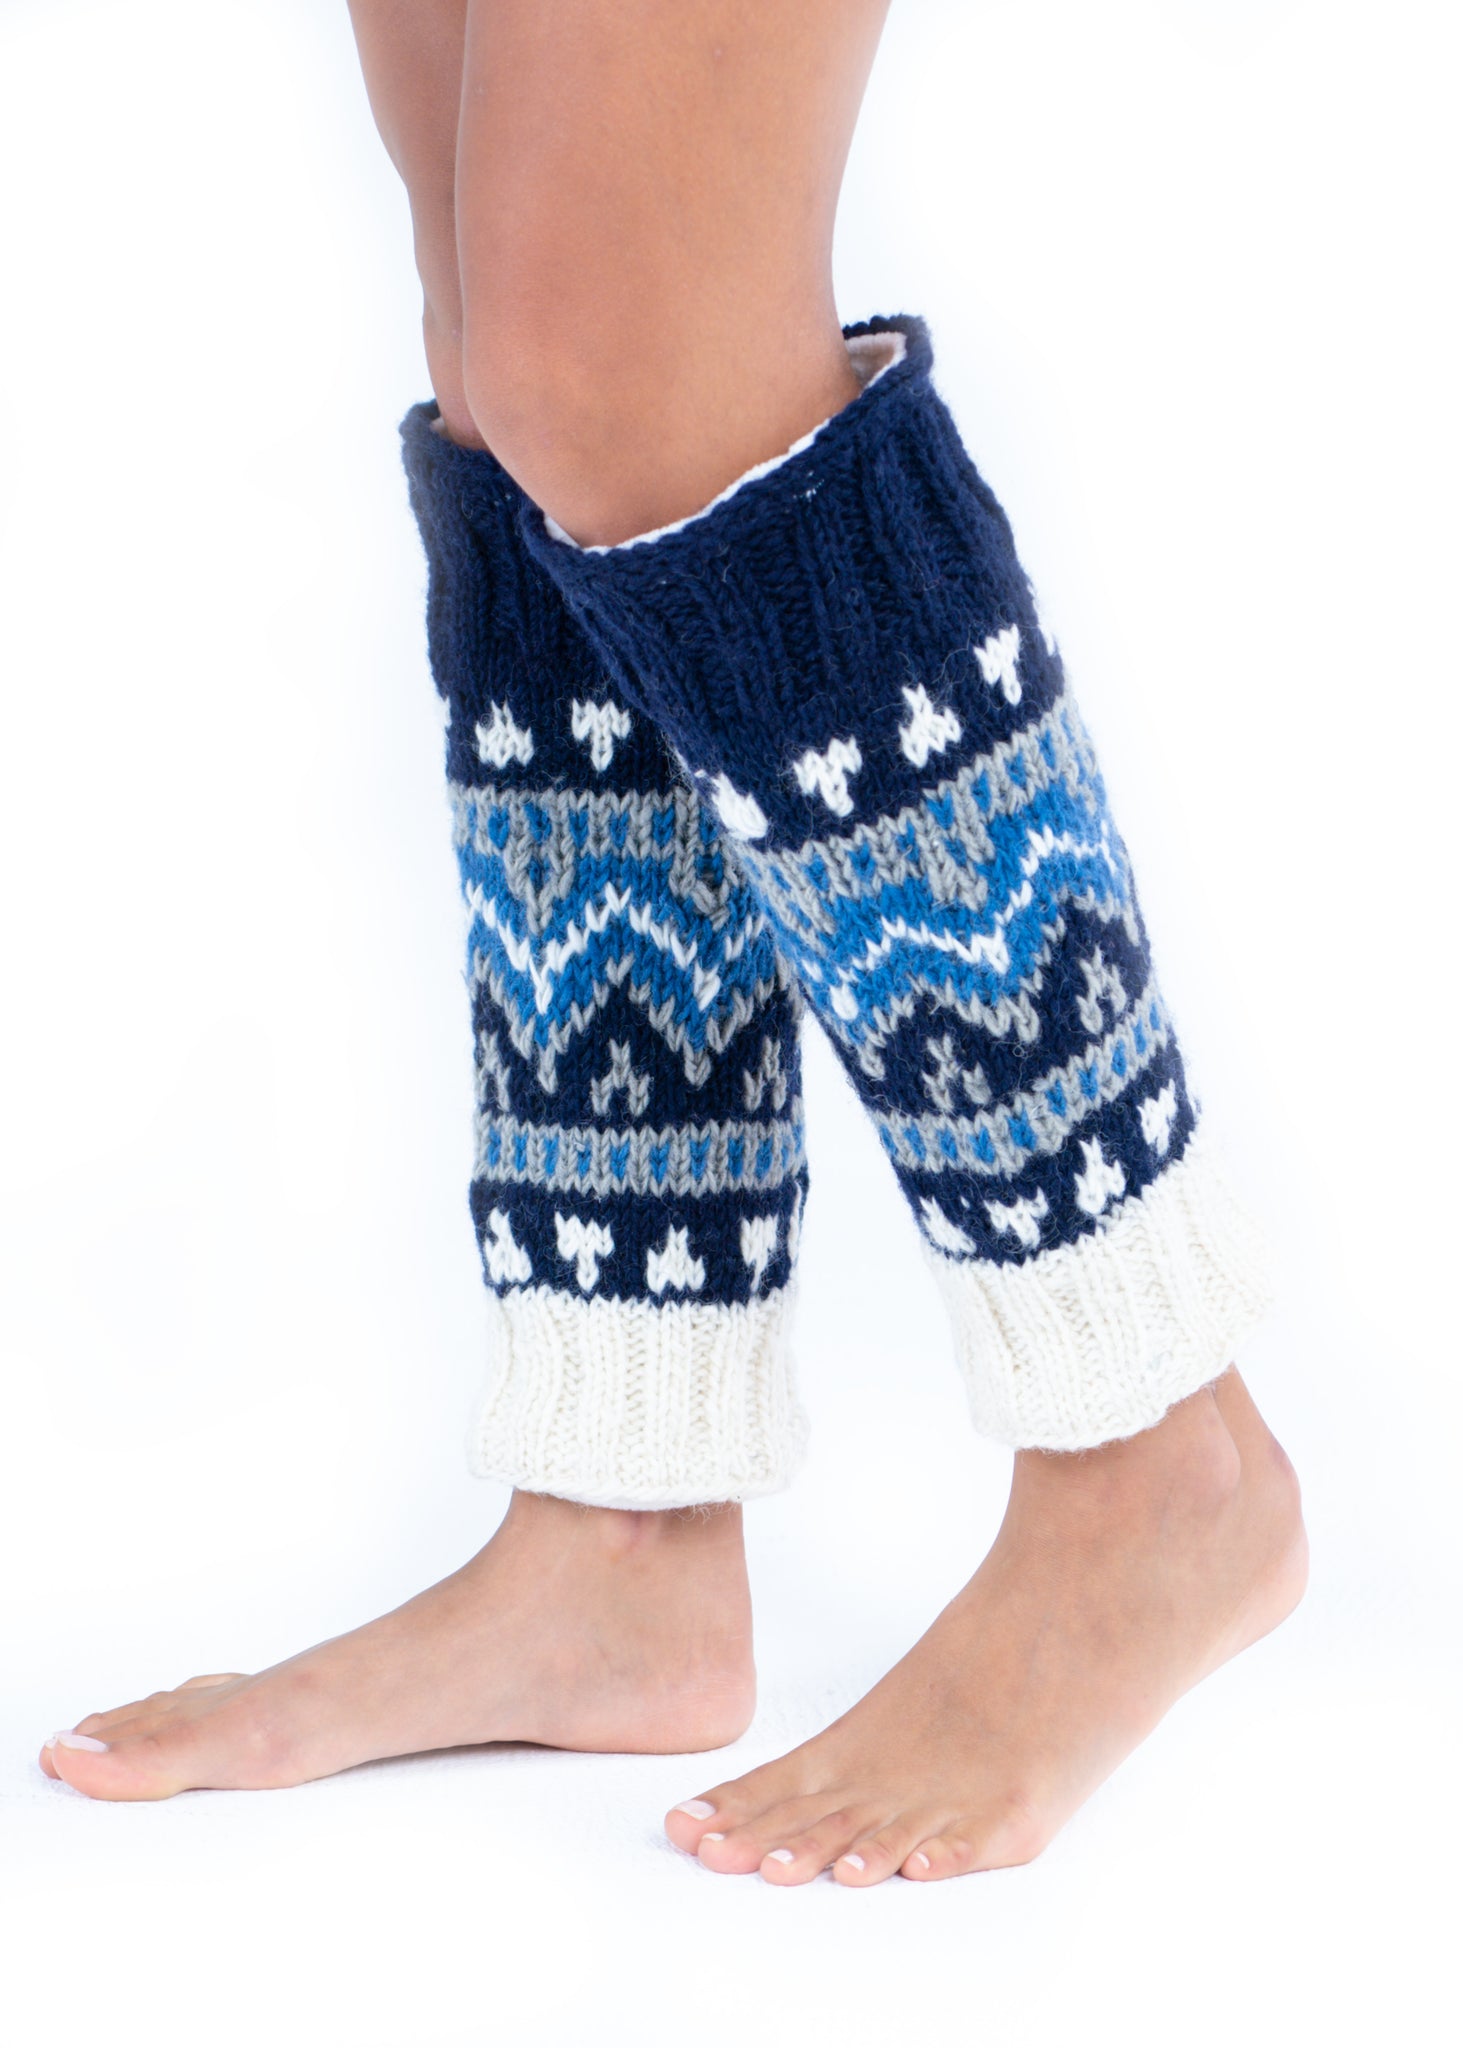 Hand-Knit Wool Leg Warmers / Boot Toppers